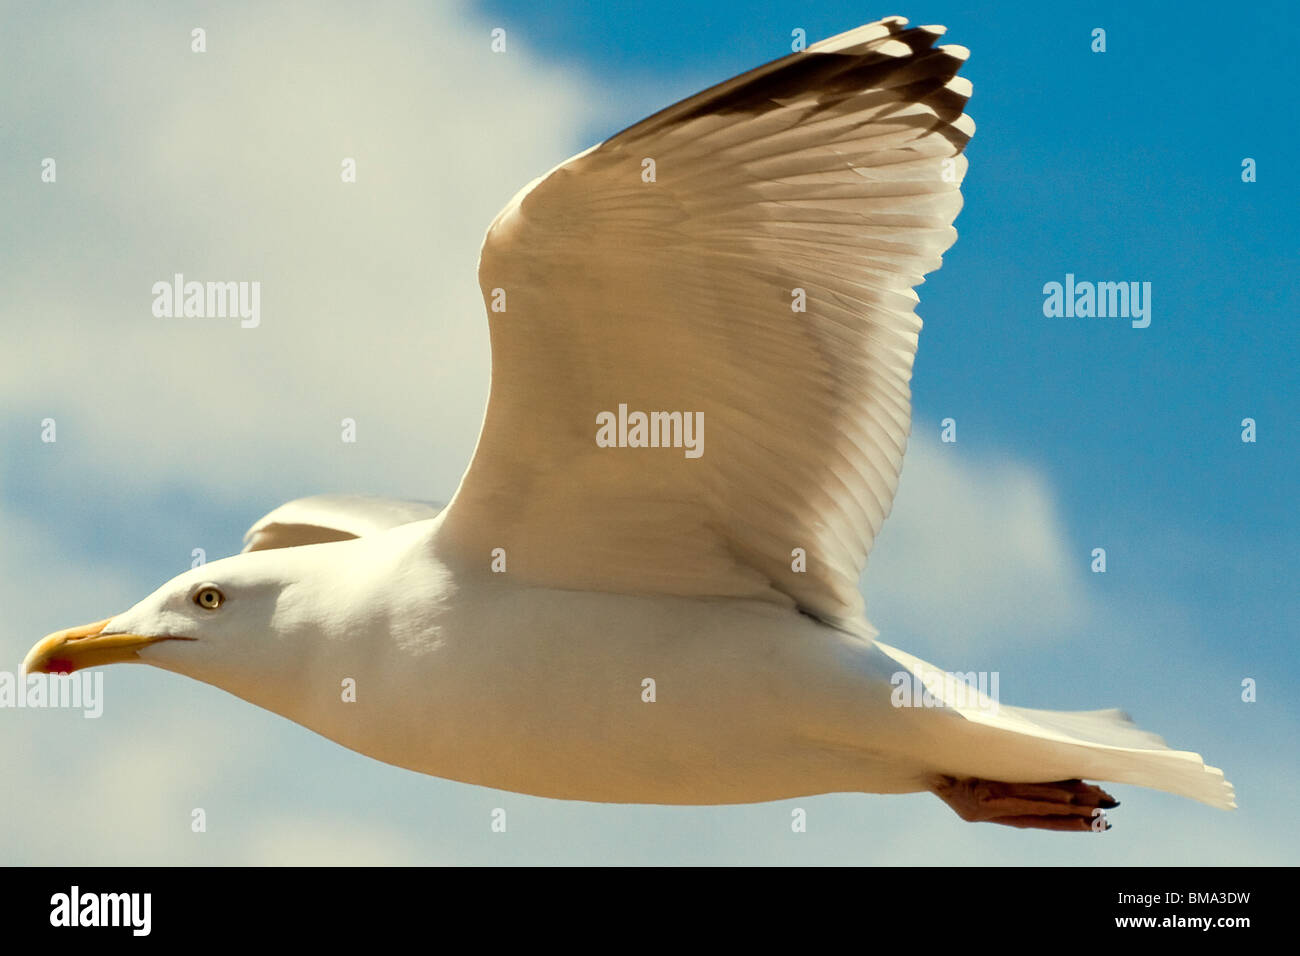 Seagull flying blue sky and white cloud background Stock Photo